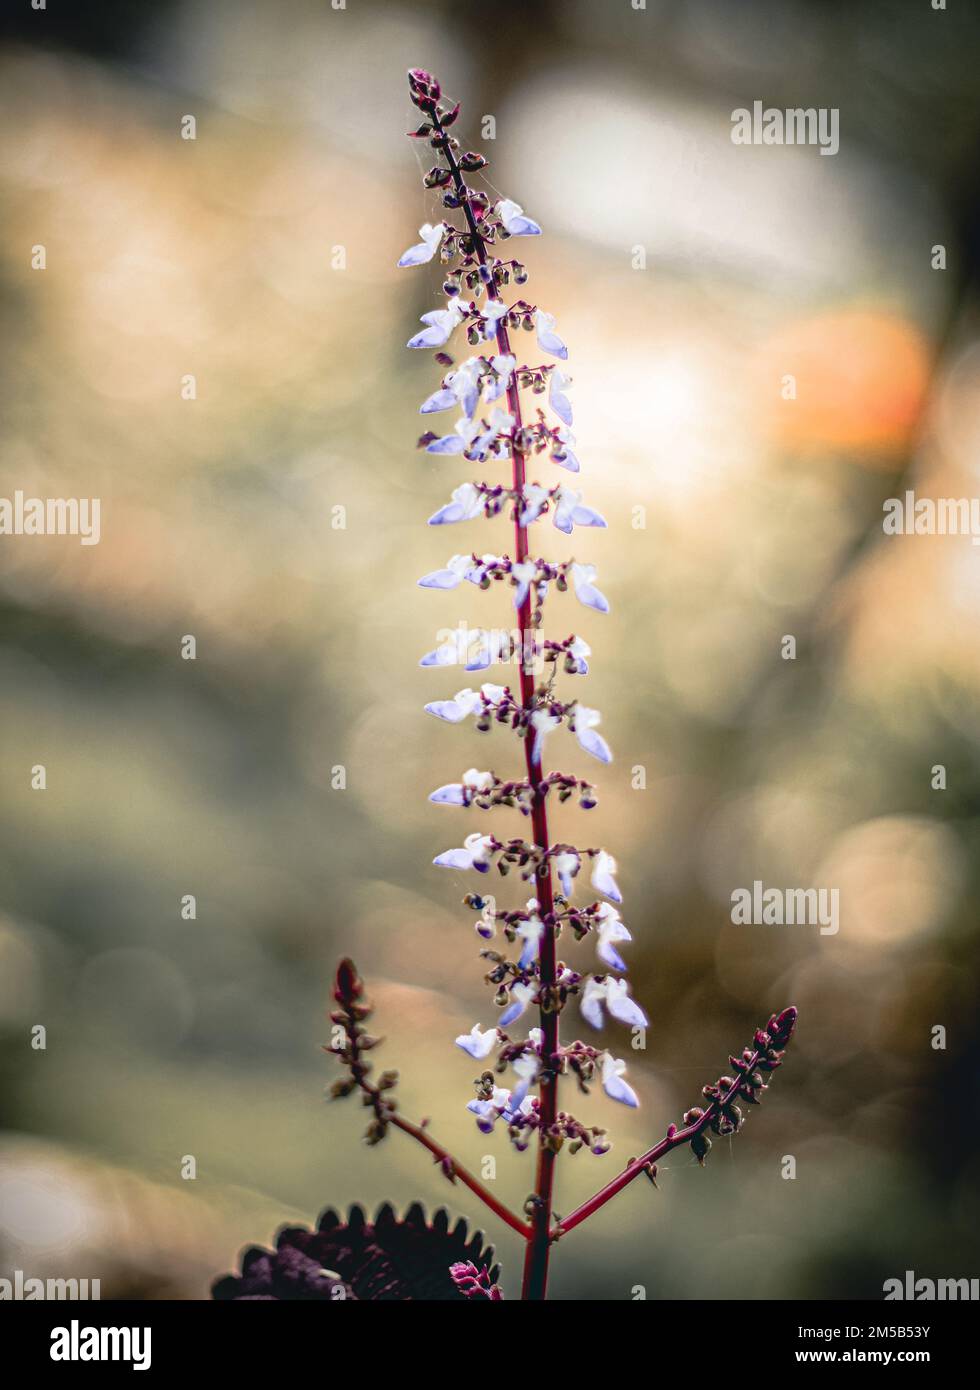 A close up of white Coleus flowers on a natural, blurred background Stock Photo